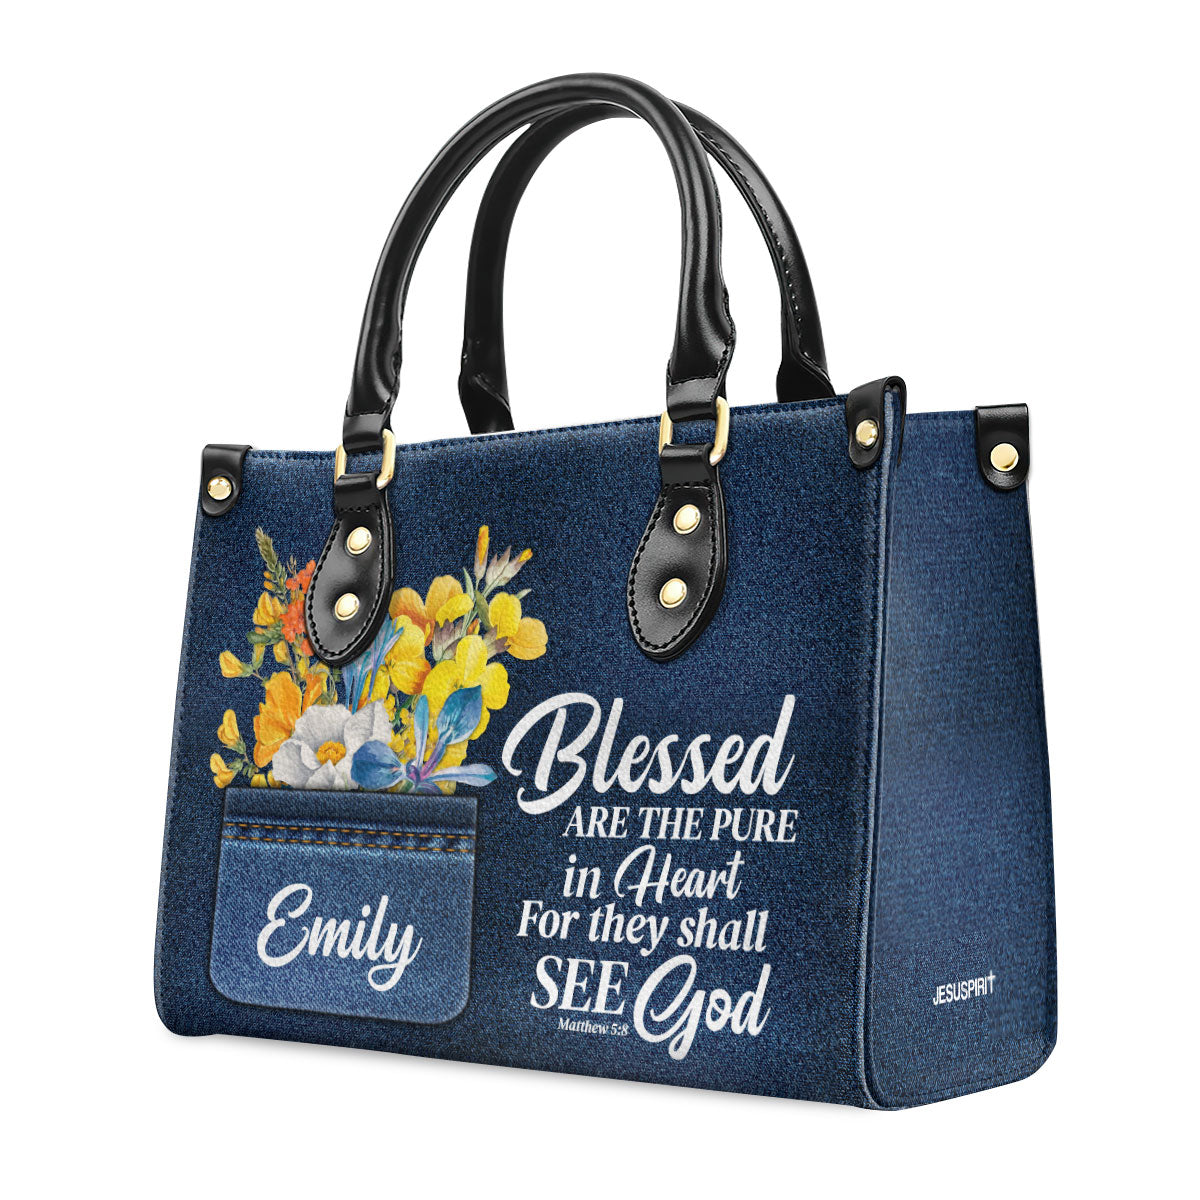 Jesuspirit | Personalized Leather Handbag With Handle | Blessed Are The Pure In Heart | Matthew 5:8 | Spiritual Gifts For Christian Women LHBHN677